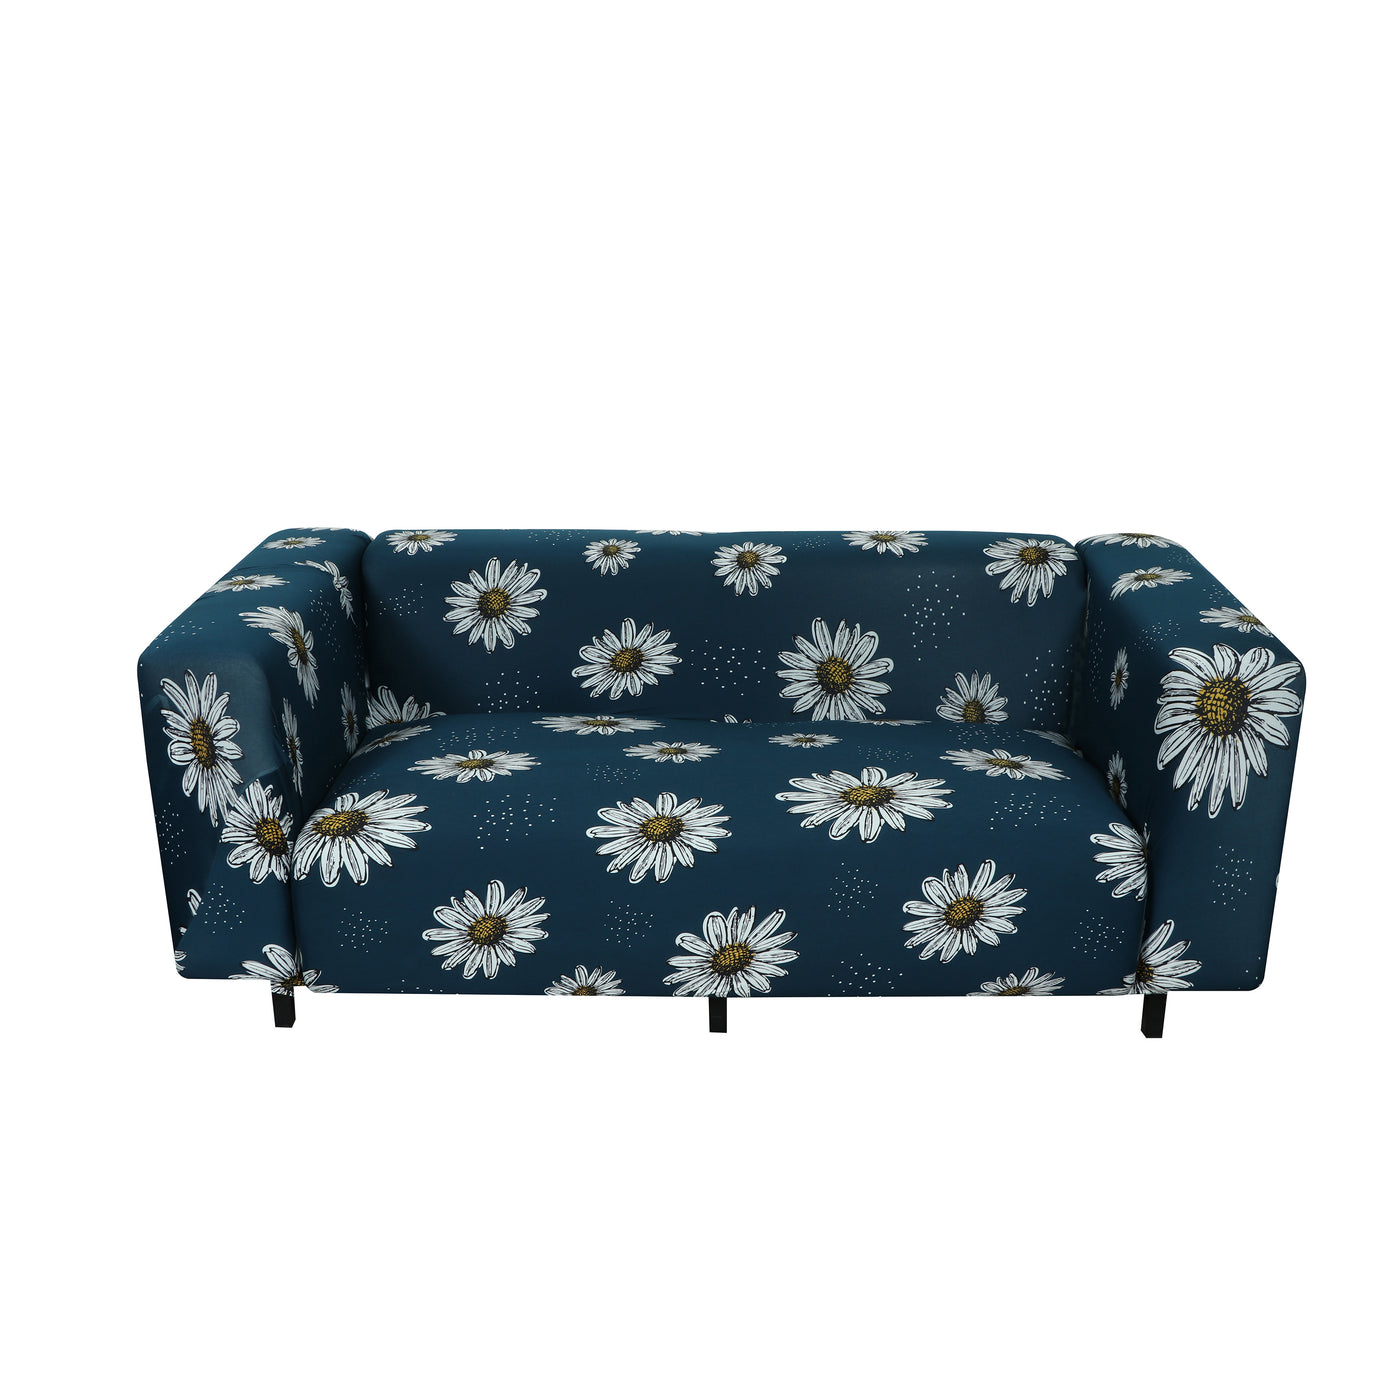 Printed Sofa Cover - Green Sunflower